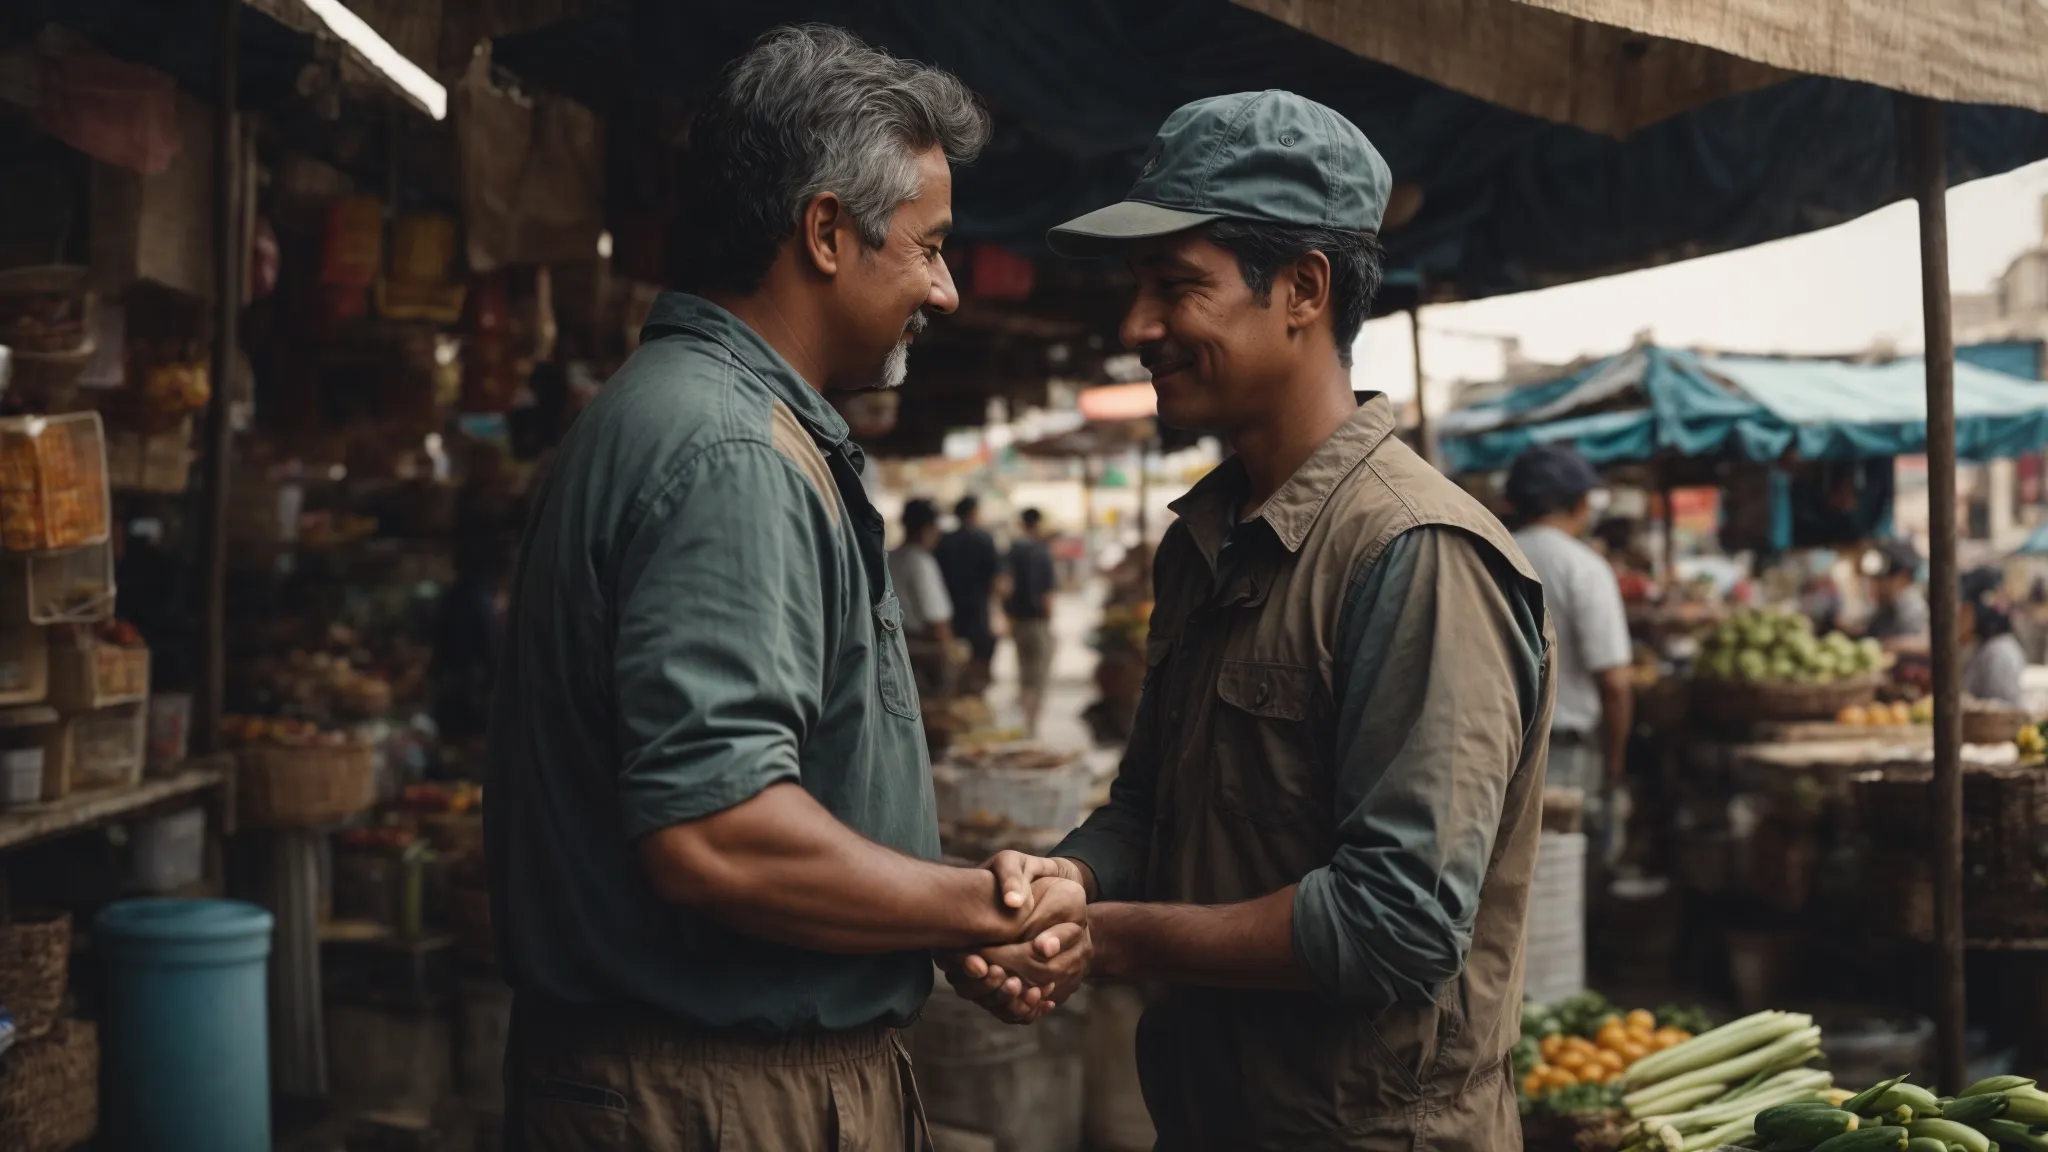 a tradesman shaking hands with a partner in front of a bustling local marketplace.